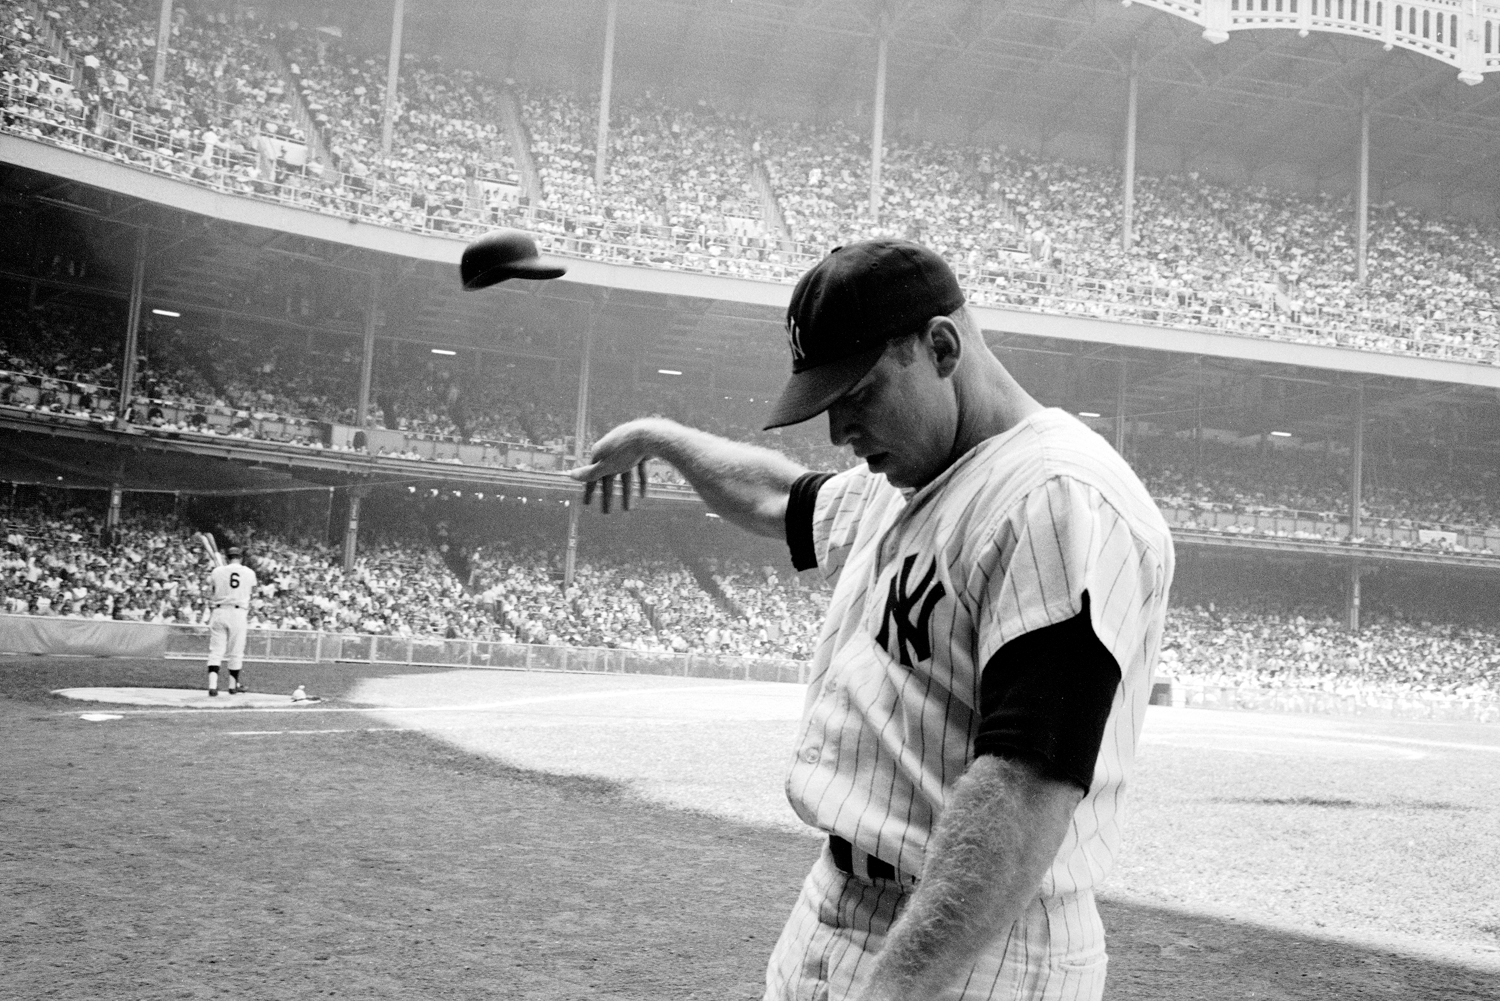 When Mickey Mantle Arrived To Replace the Great DiMaggio - Baseball Egg